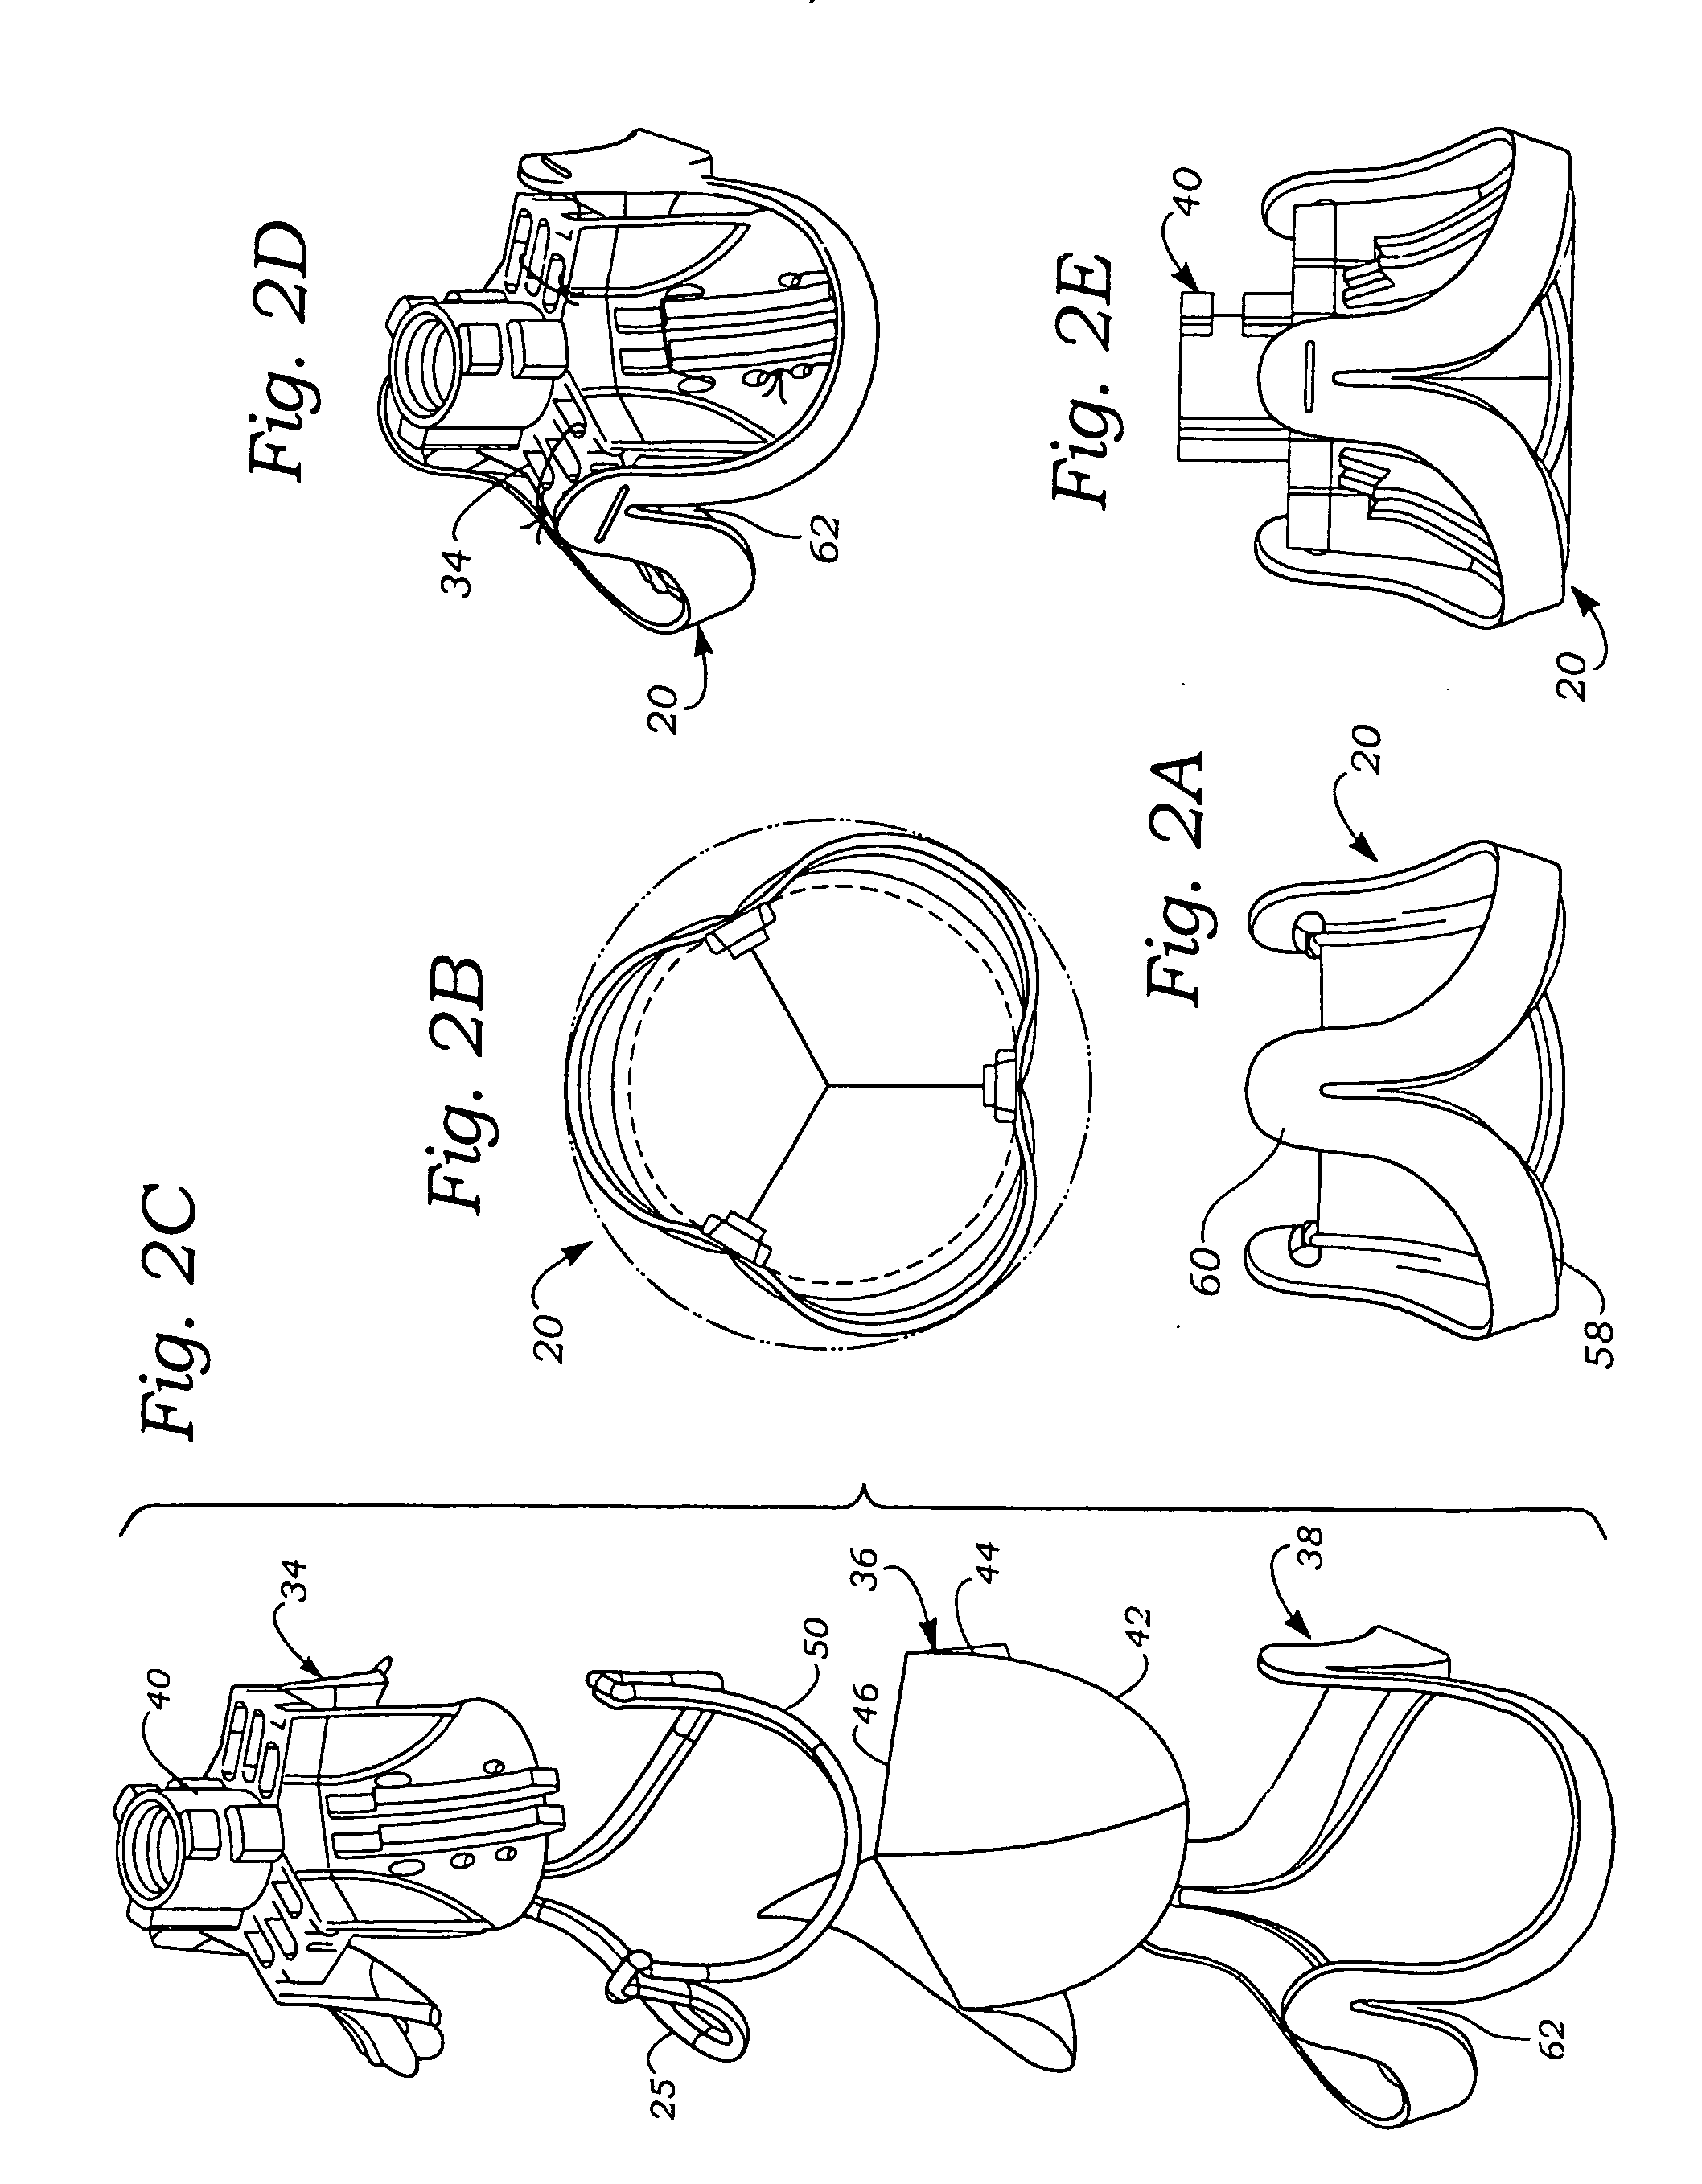 Method of manufacture of a heart valve support frame